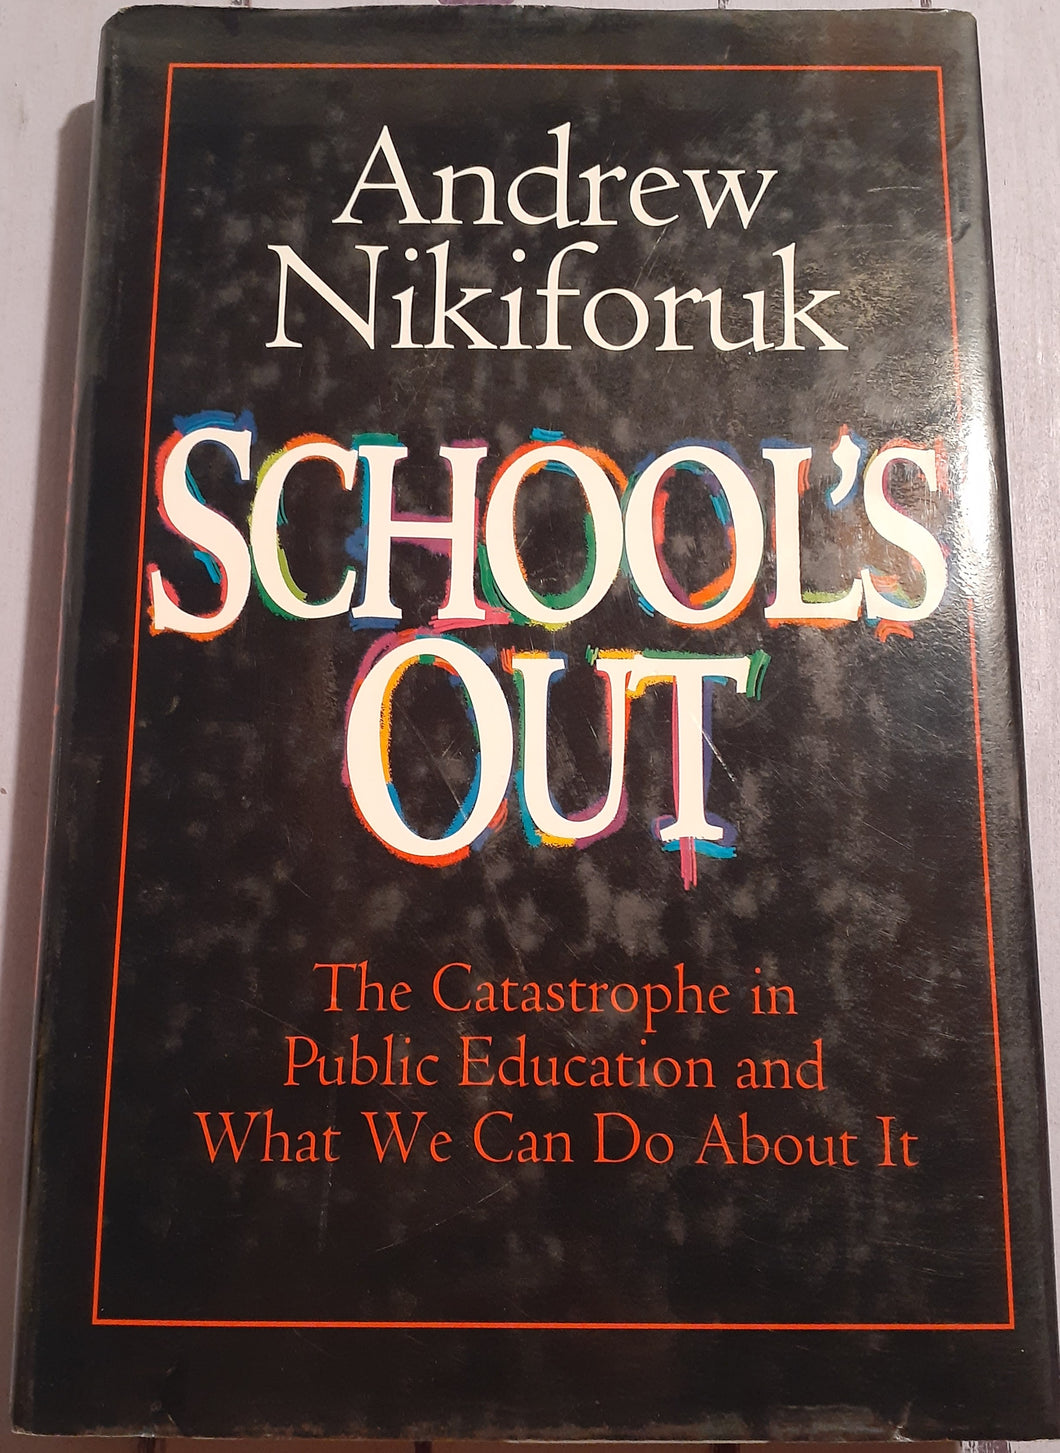 School's Out: The Catastrophe in Public Education and what We Can Do about it